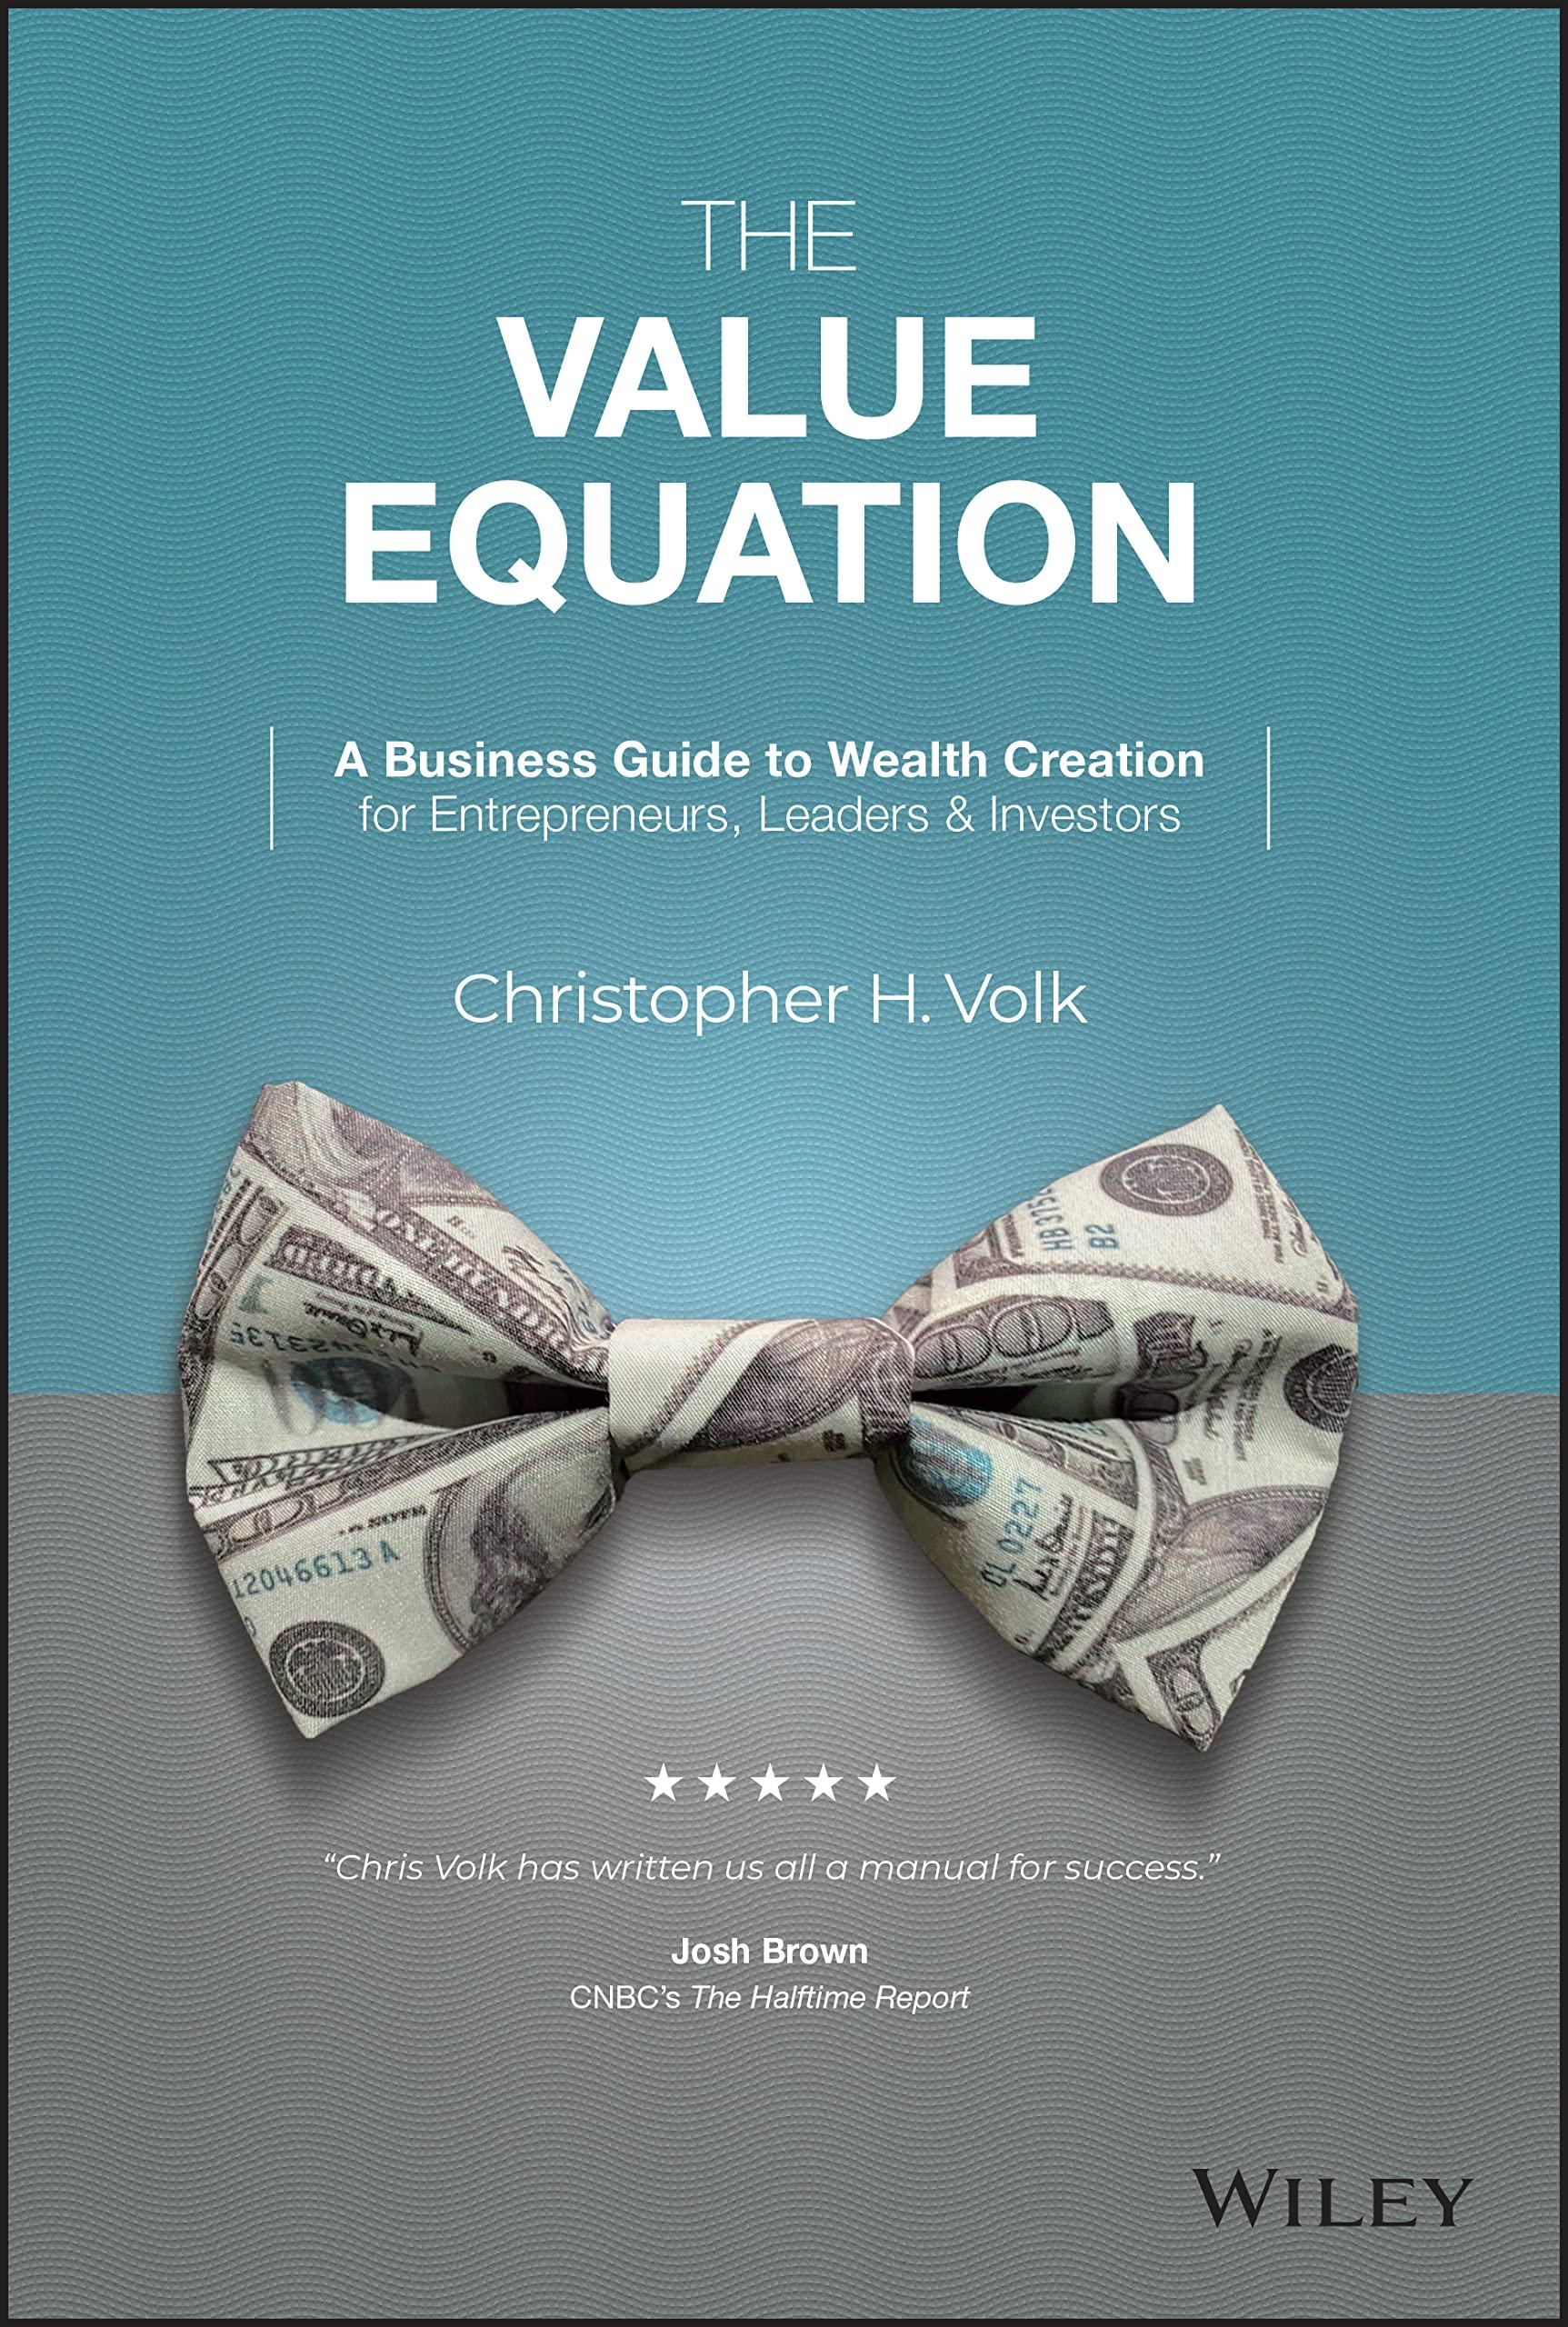 The Value Equation A Business Guide To Wealth Creation For Entrepreneurs Leaders And Investors